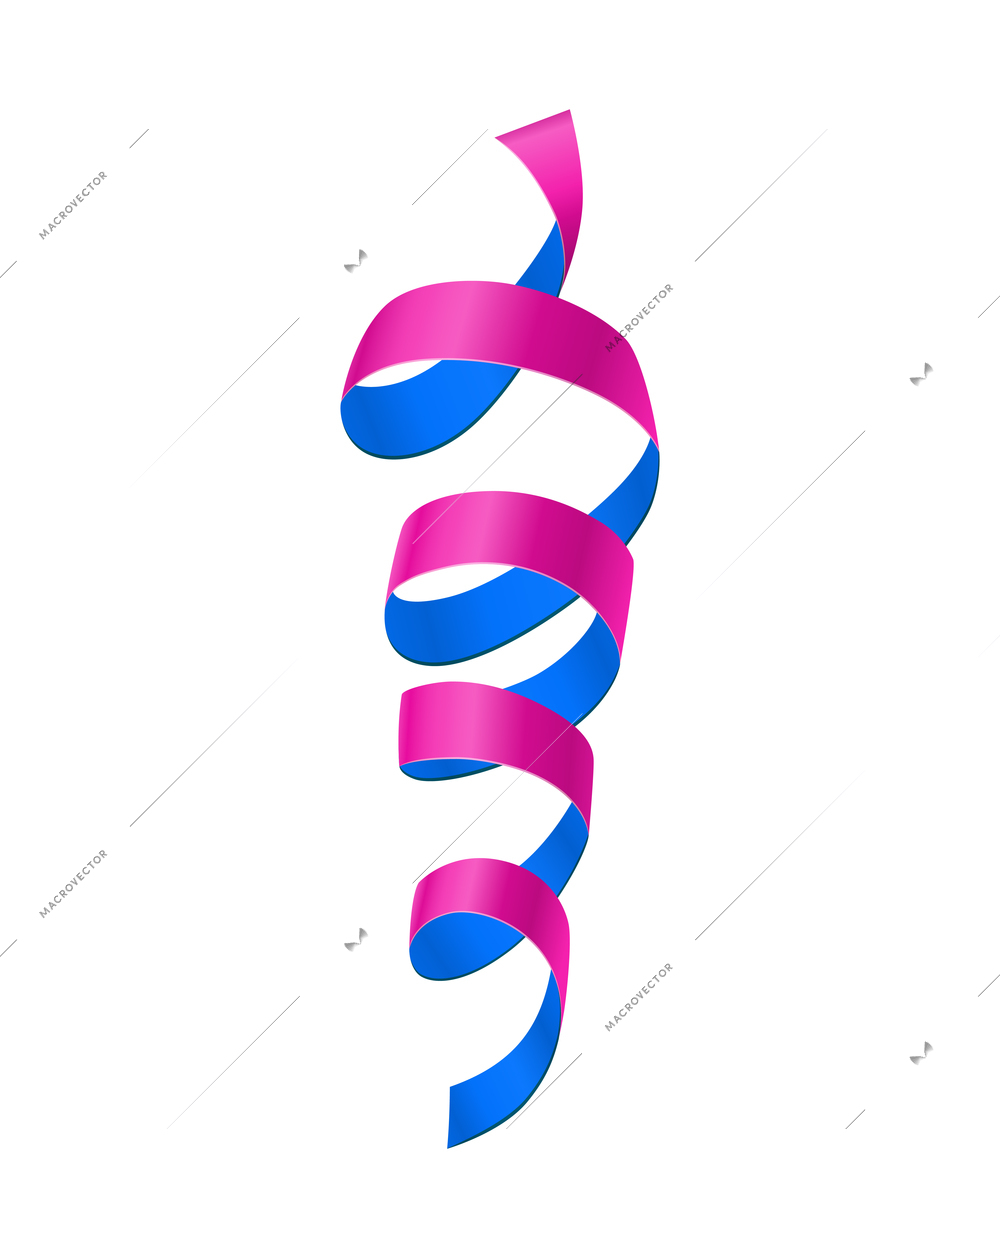 Realistic curled colorful paper streamer on white background vector illustration